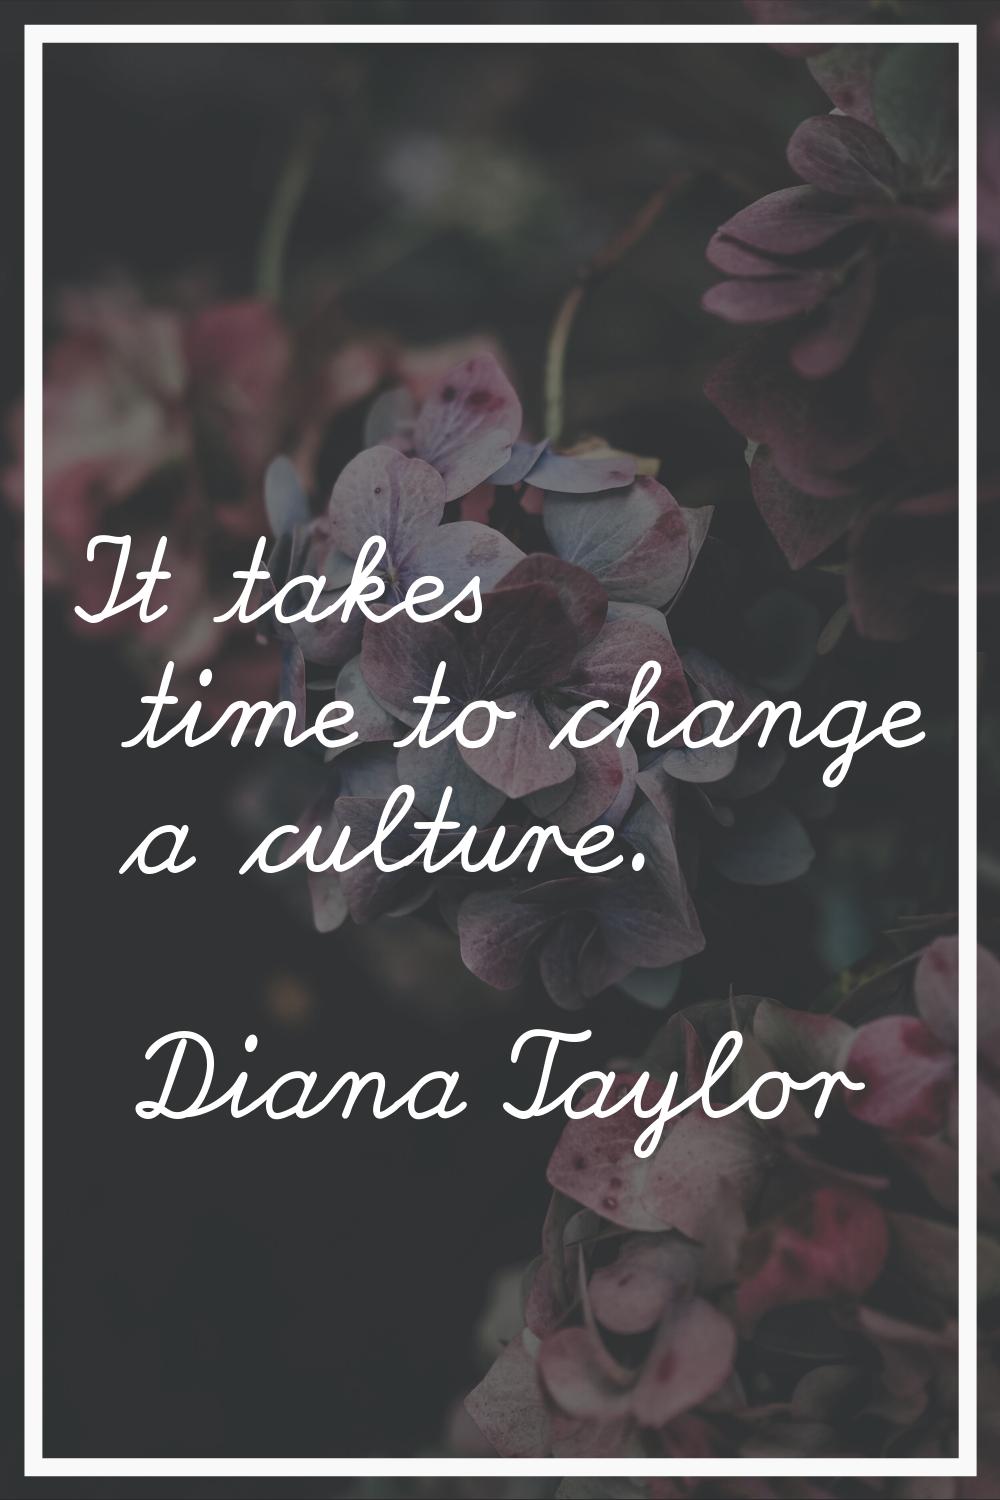 It takes time to change a culture.